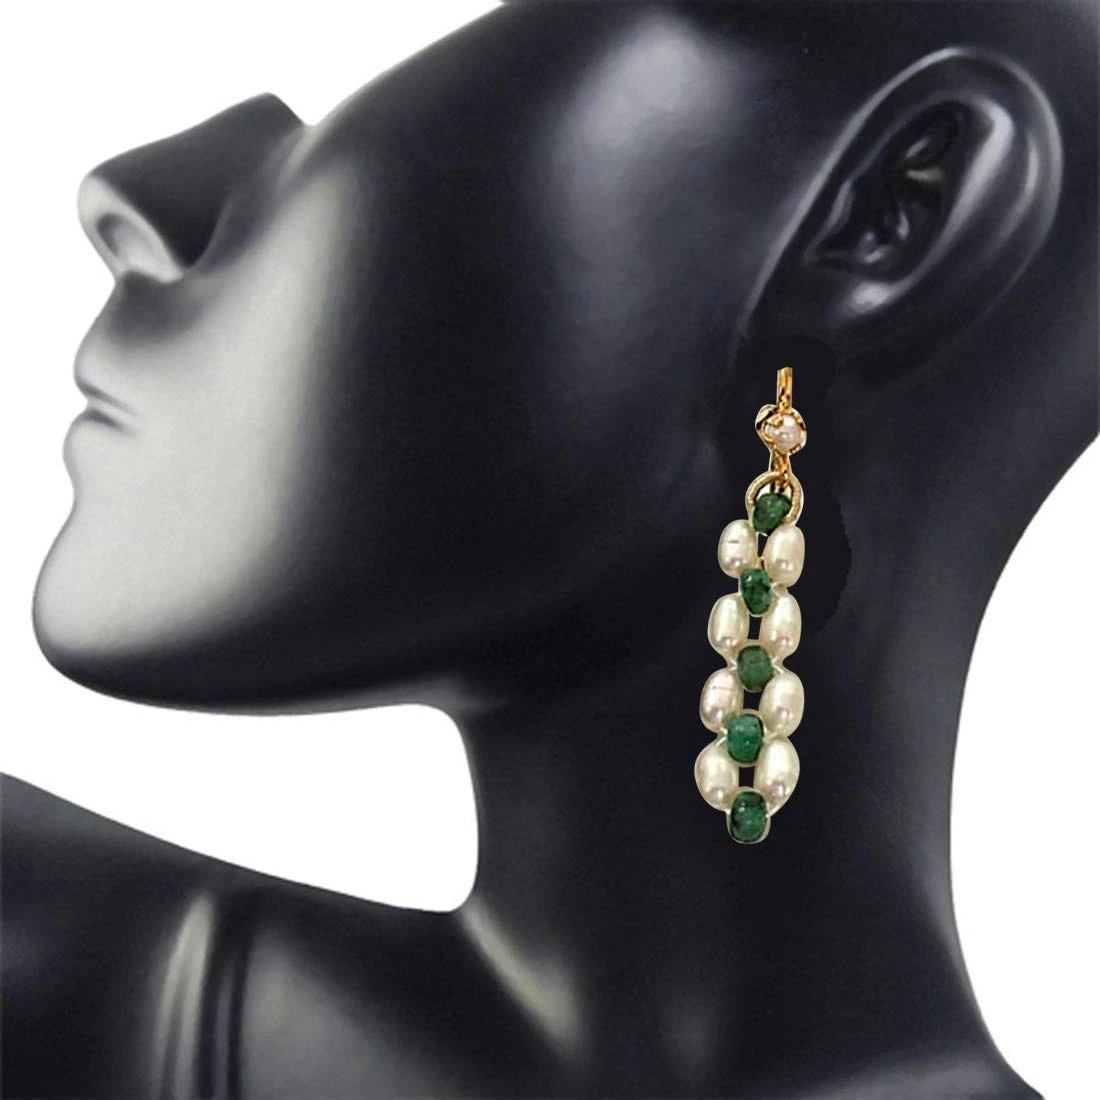 Real Emerald beads & Rice Pearl Hanging Earrings for Women (SE125)